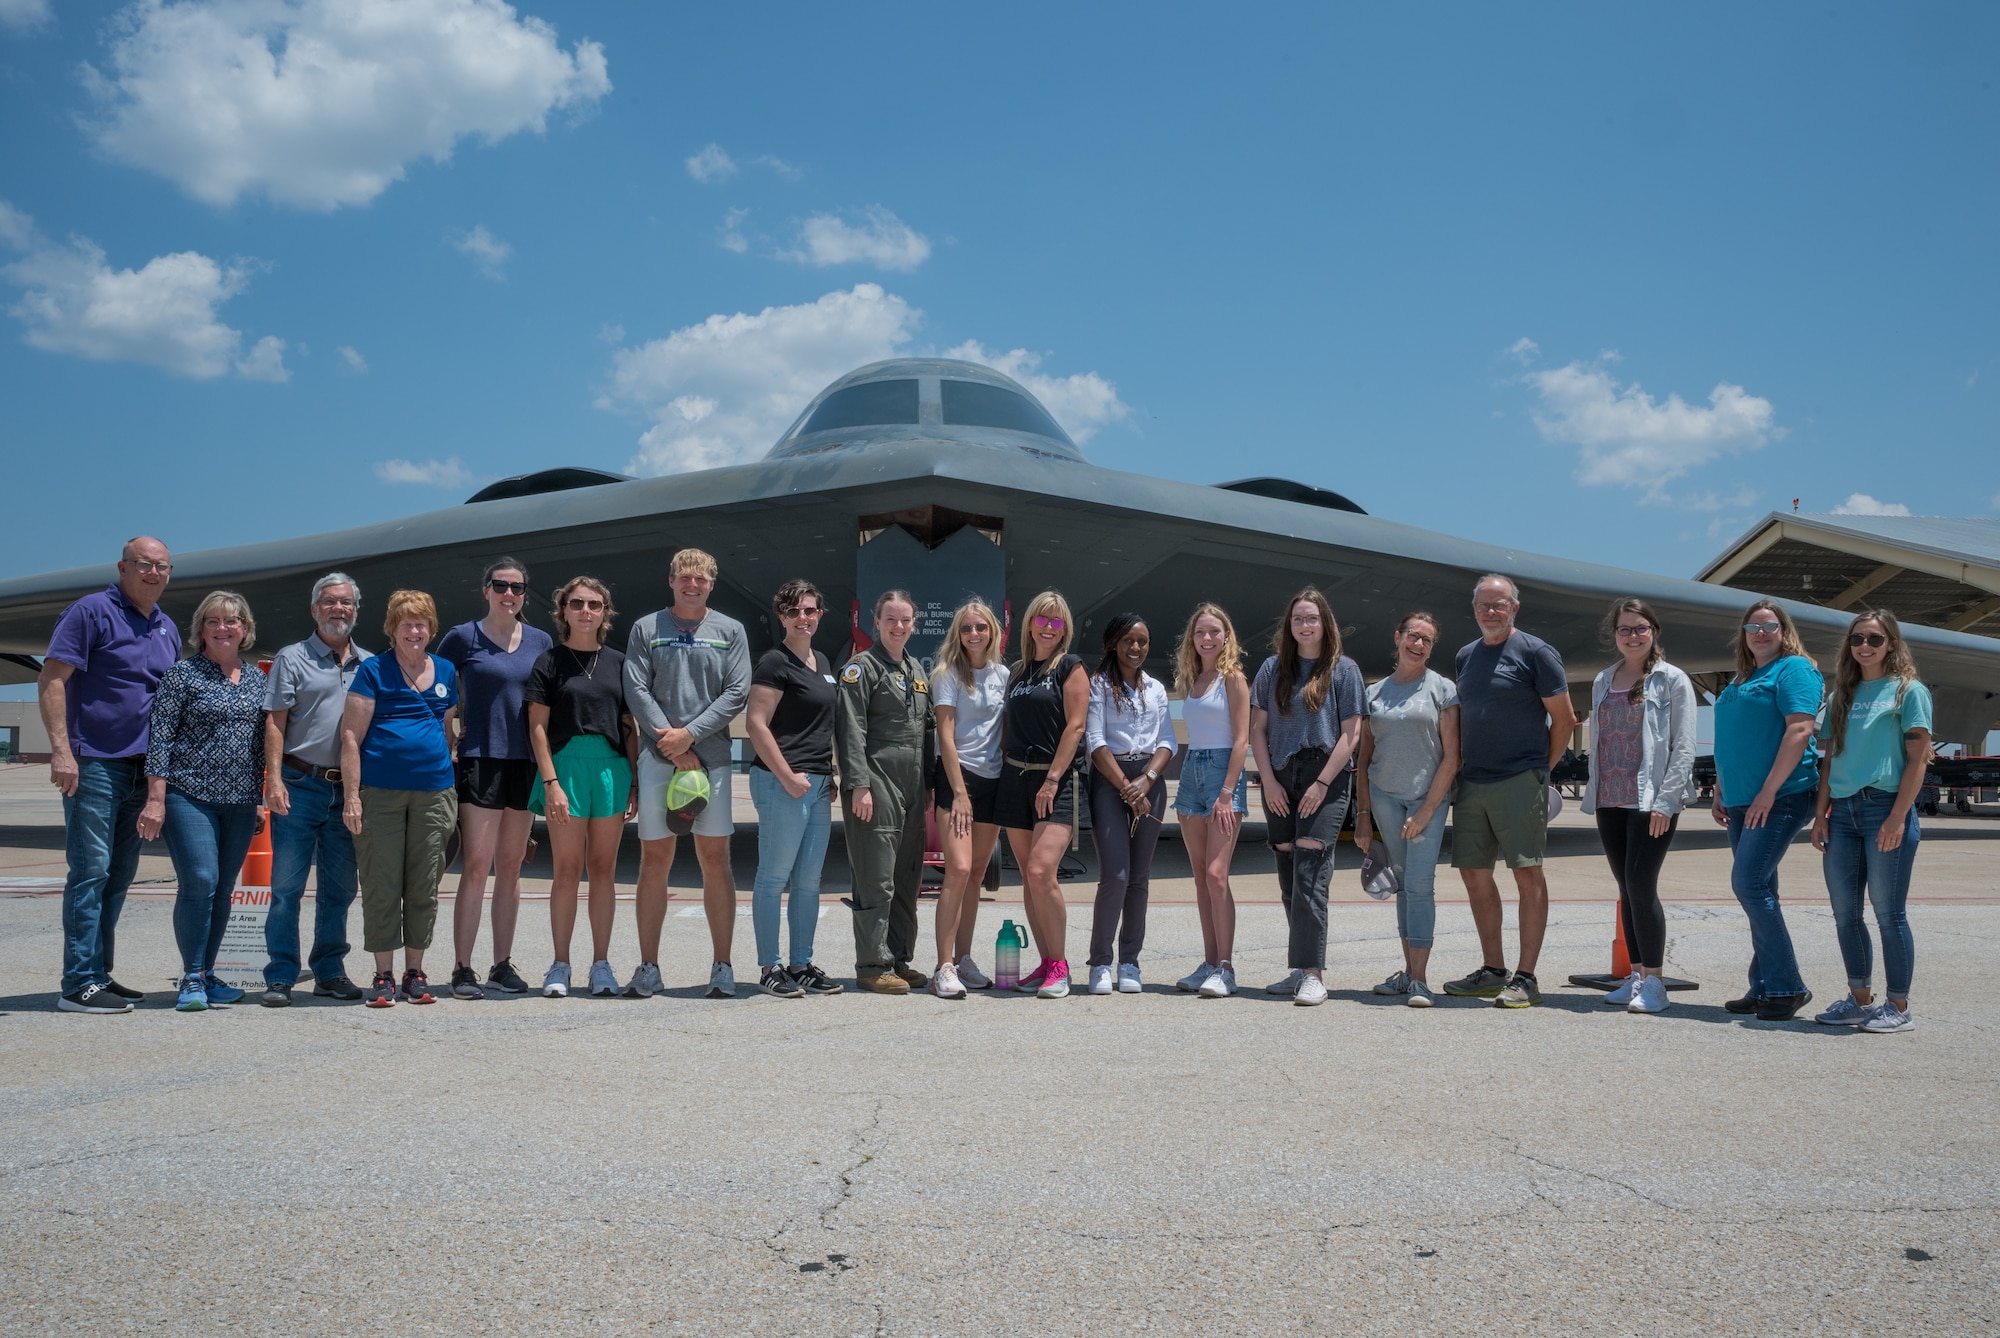 Members of the Ninety-Nines Greater Kansas City Chapter stand for a photo in front of the B-2 Spirit Stealth Bomber at Whiteman Air Force Base, Missouri, June 22, 2023. The Ninety-Nines are an international organization of women pilots that promotes the advancement of aviation through education, scholarships and mutual support. (U.S Air Force photo by Senior Airman Christina Carter)